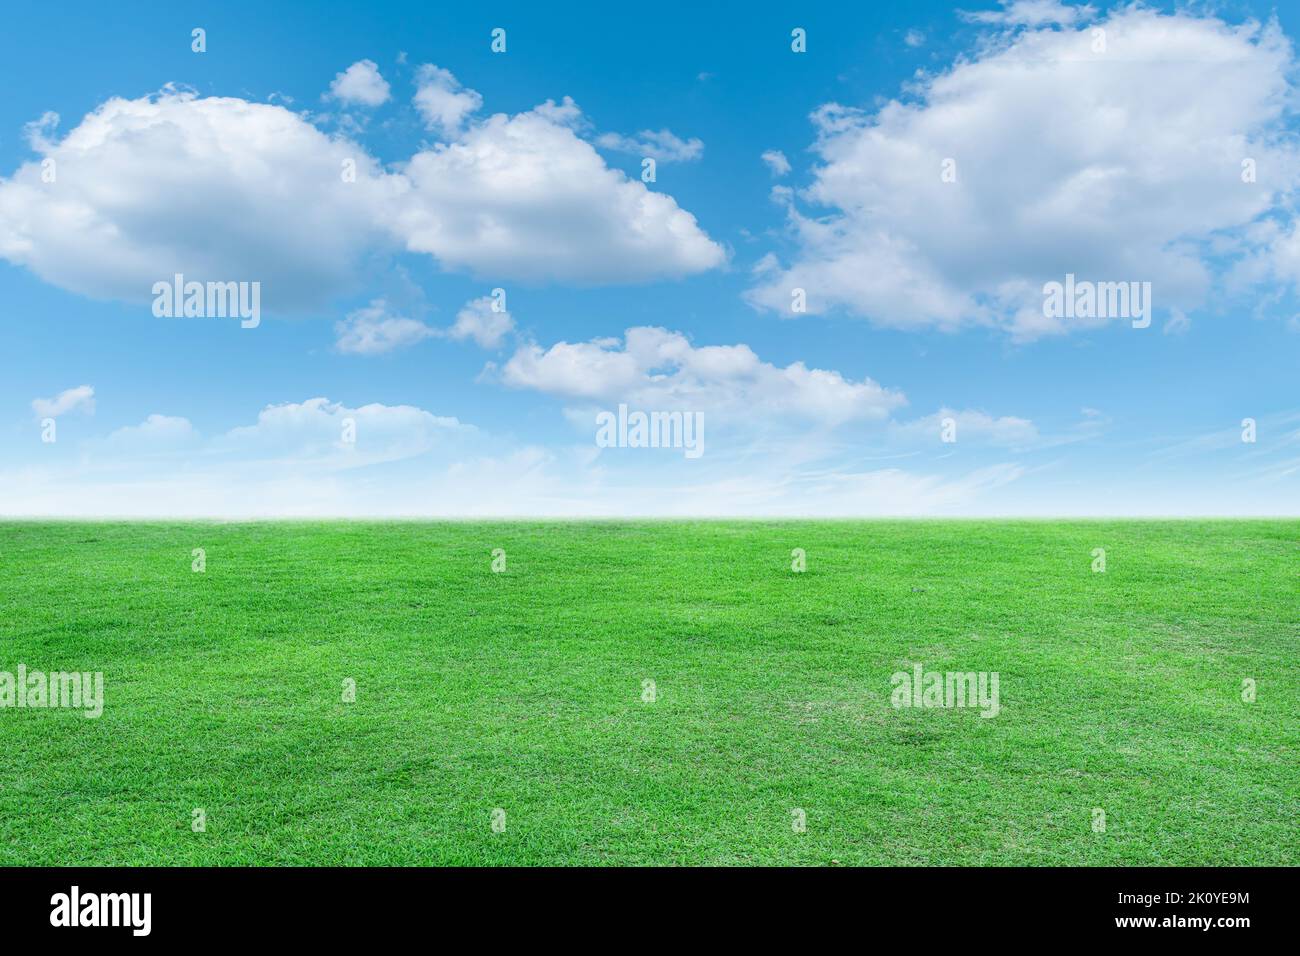 Landscape view of green grass with bright blue sky and clouds background. Stock Photo